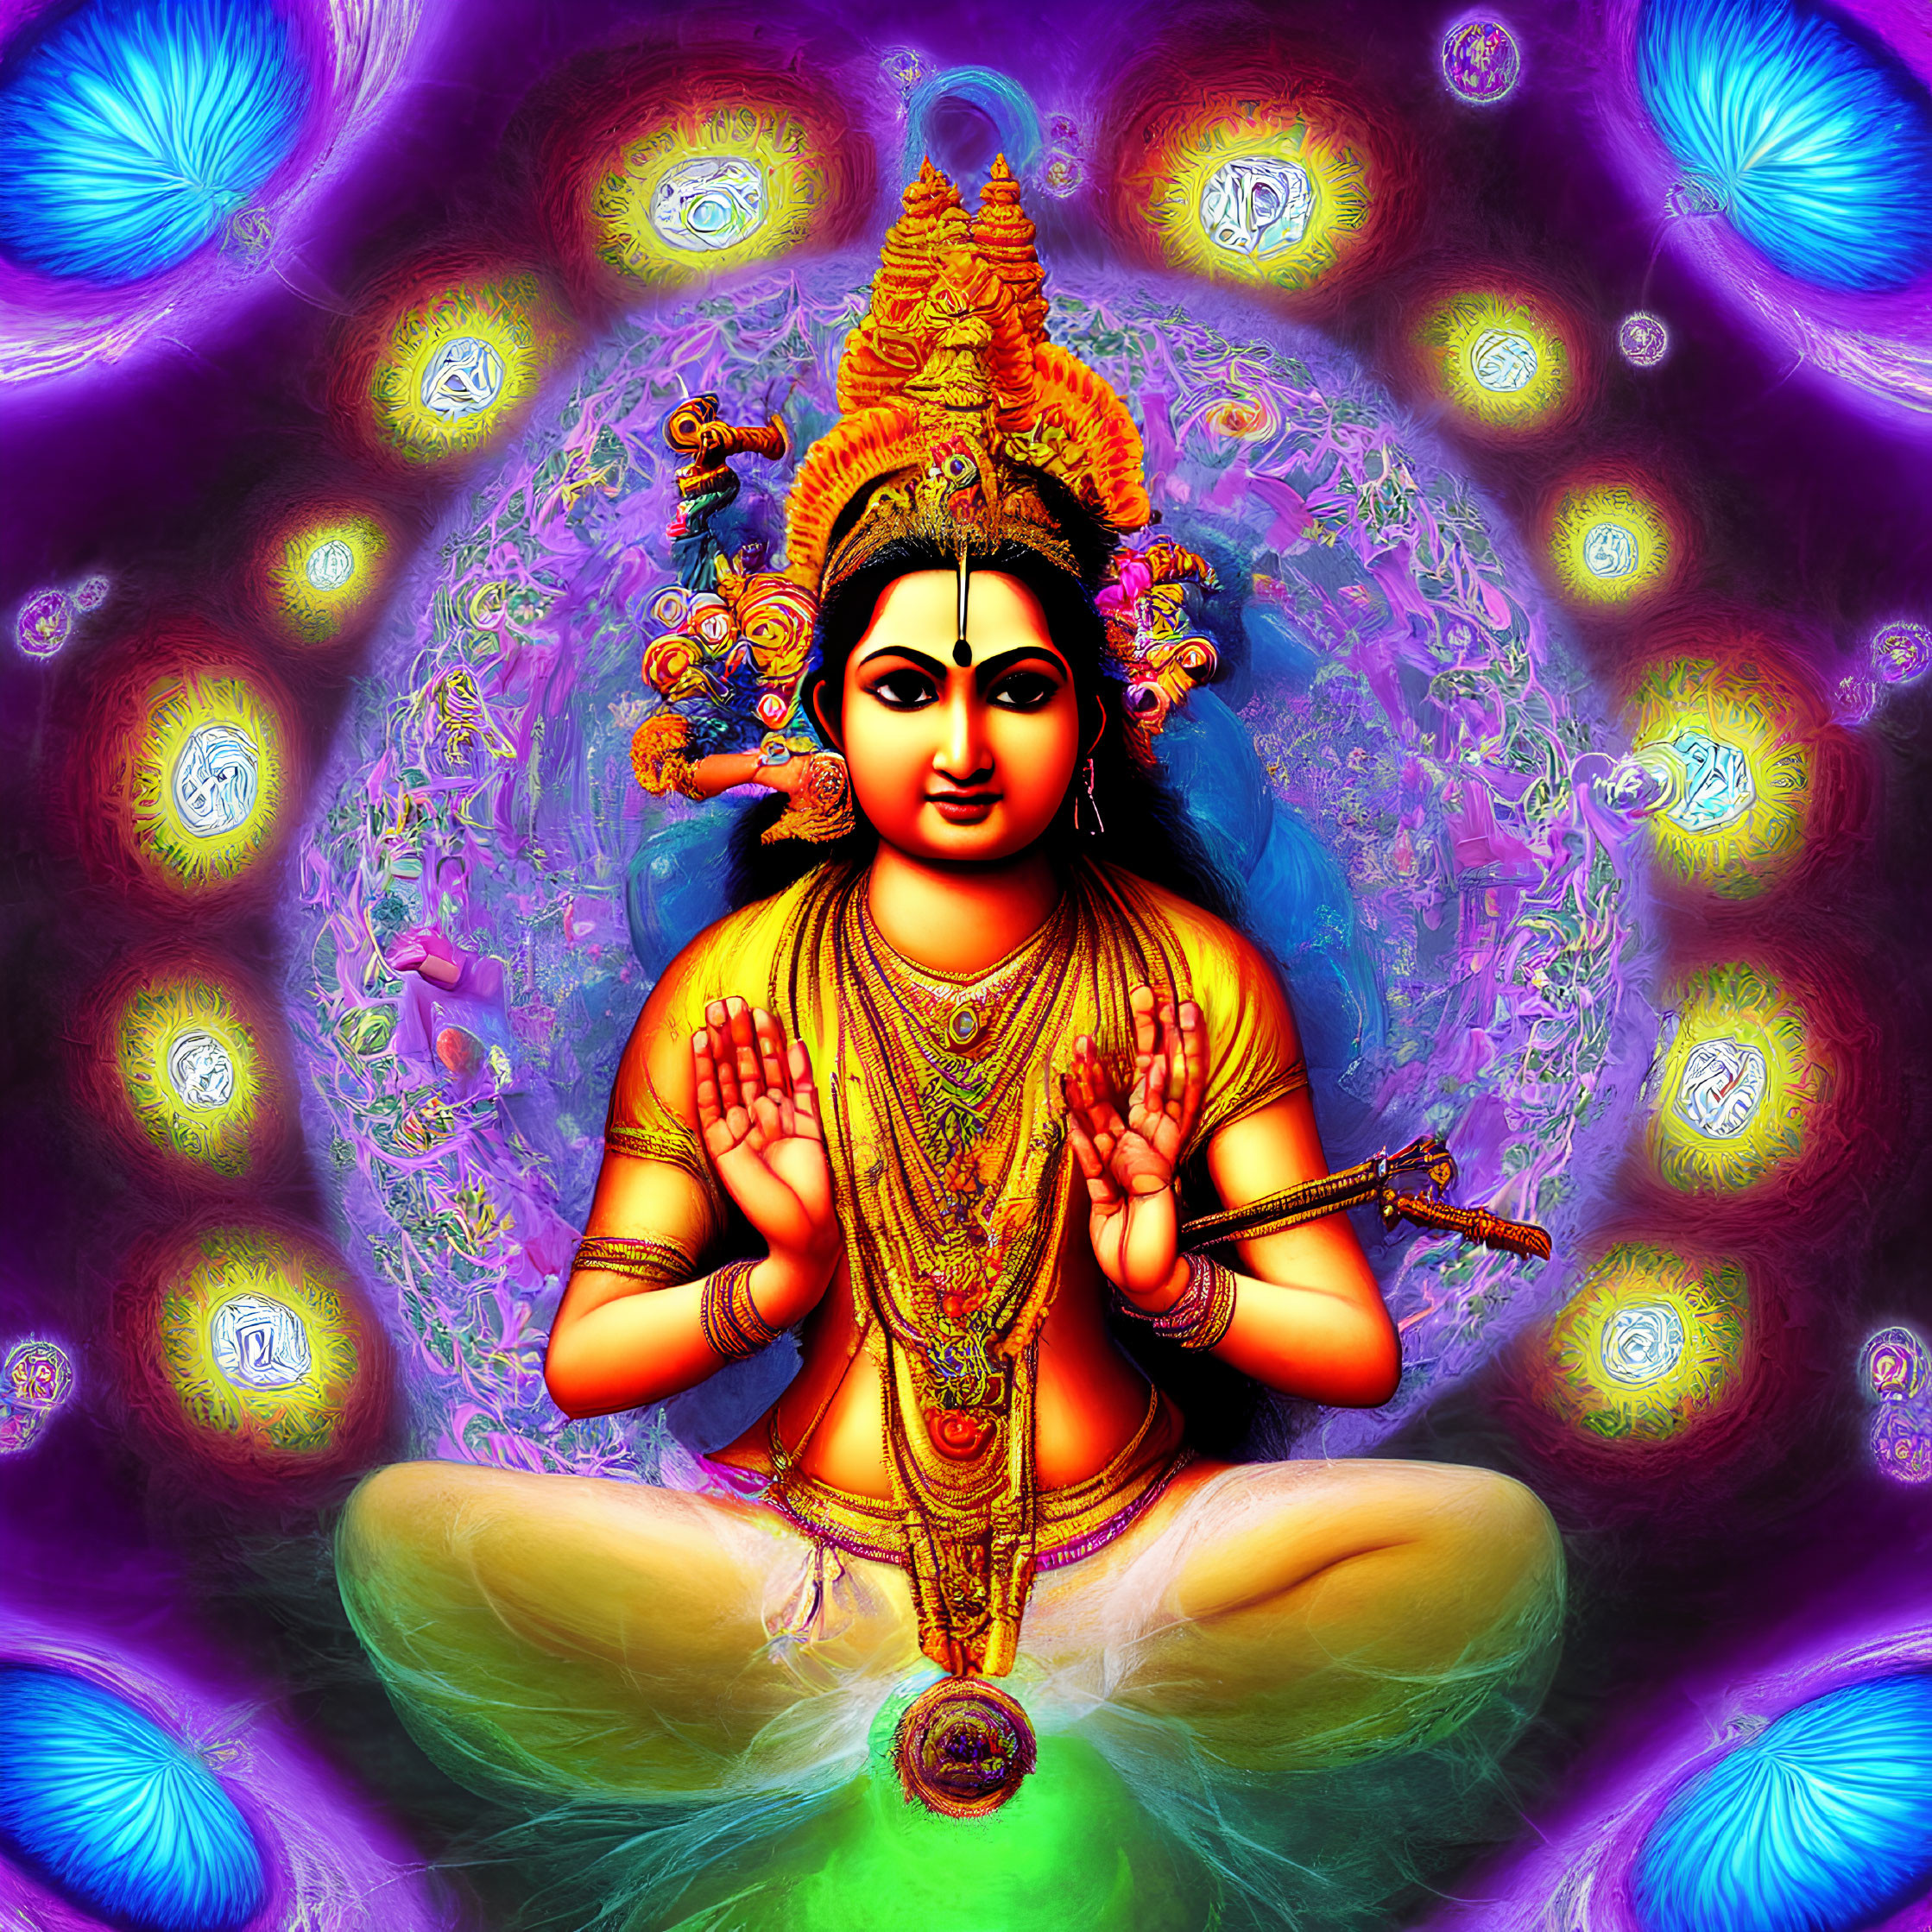 Colorful Psychedelic Illustration of Four-Armed Figure in Lotus Position